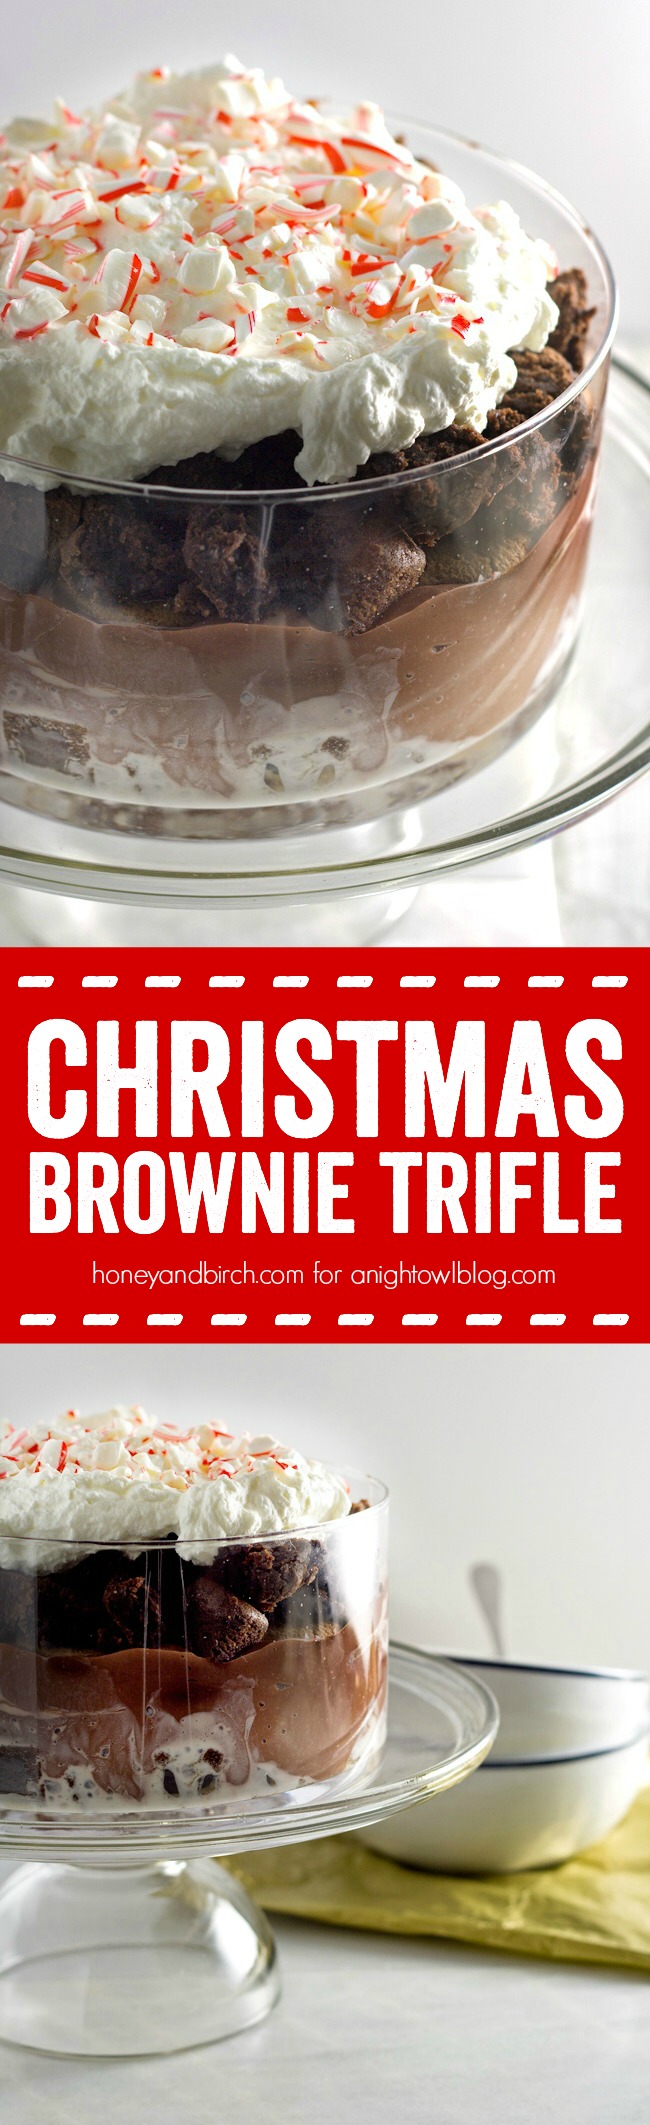 Christmas Brownie Trifle - all the flavors of the holidays in one easy to assemble and delicious dessert!